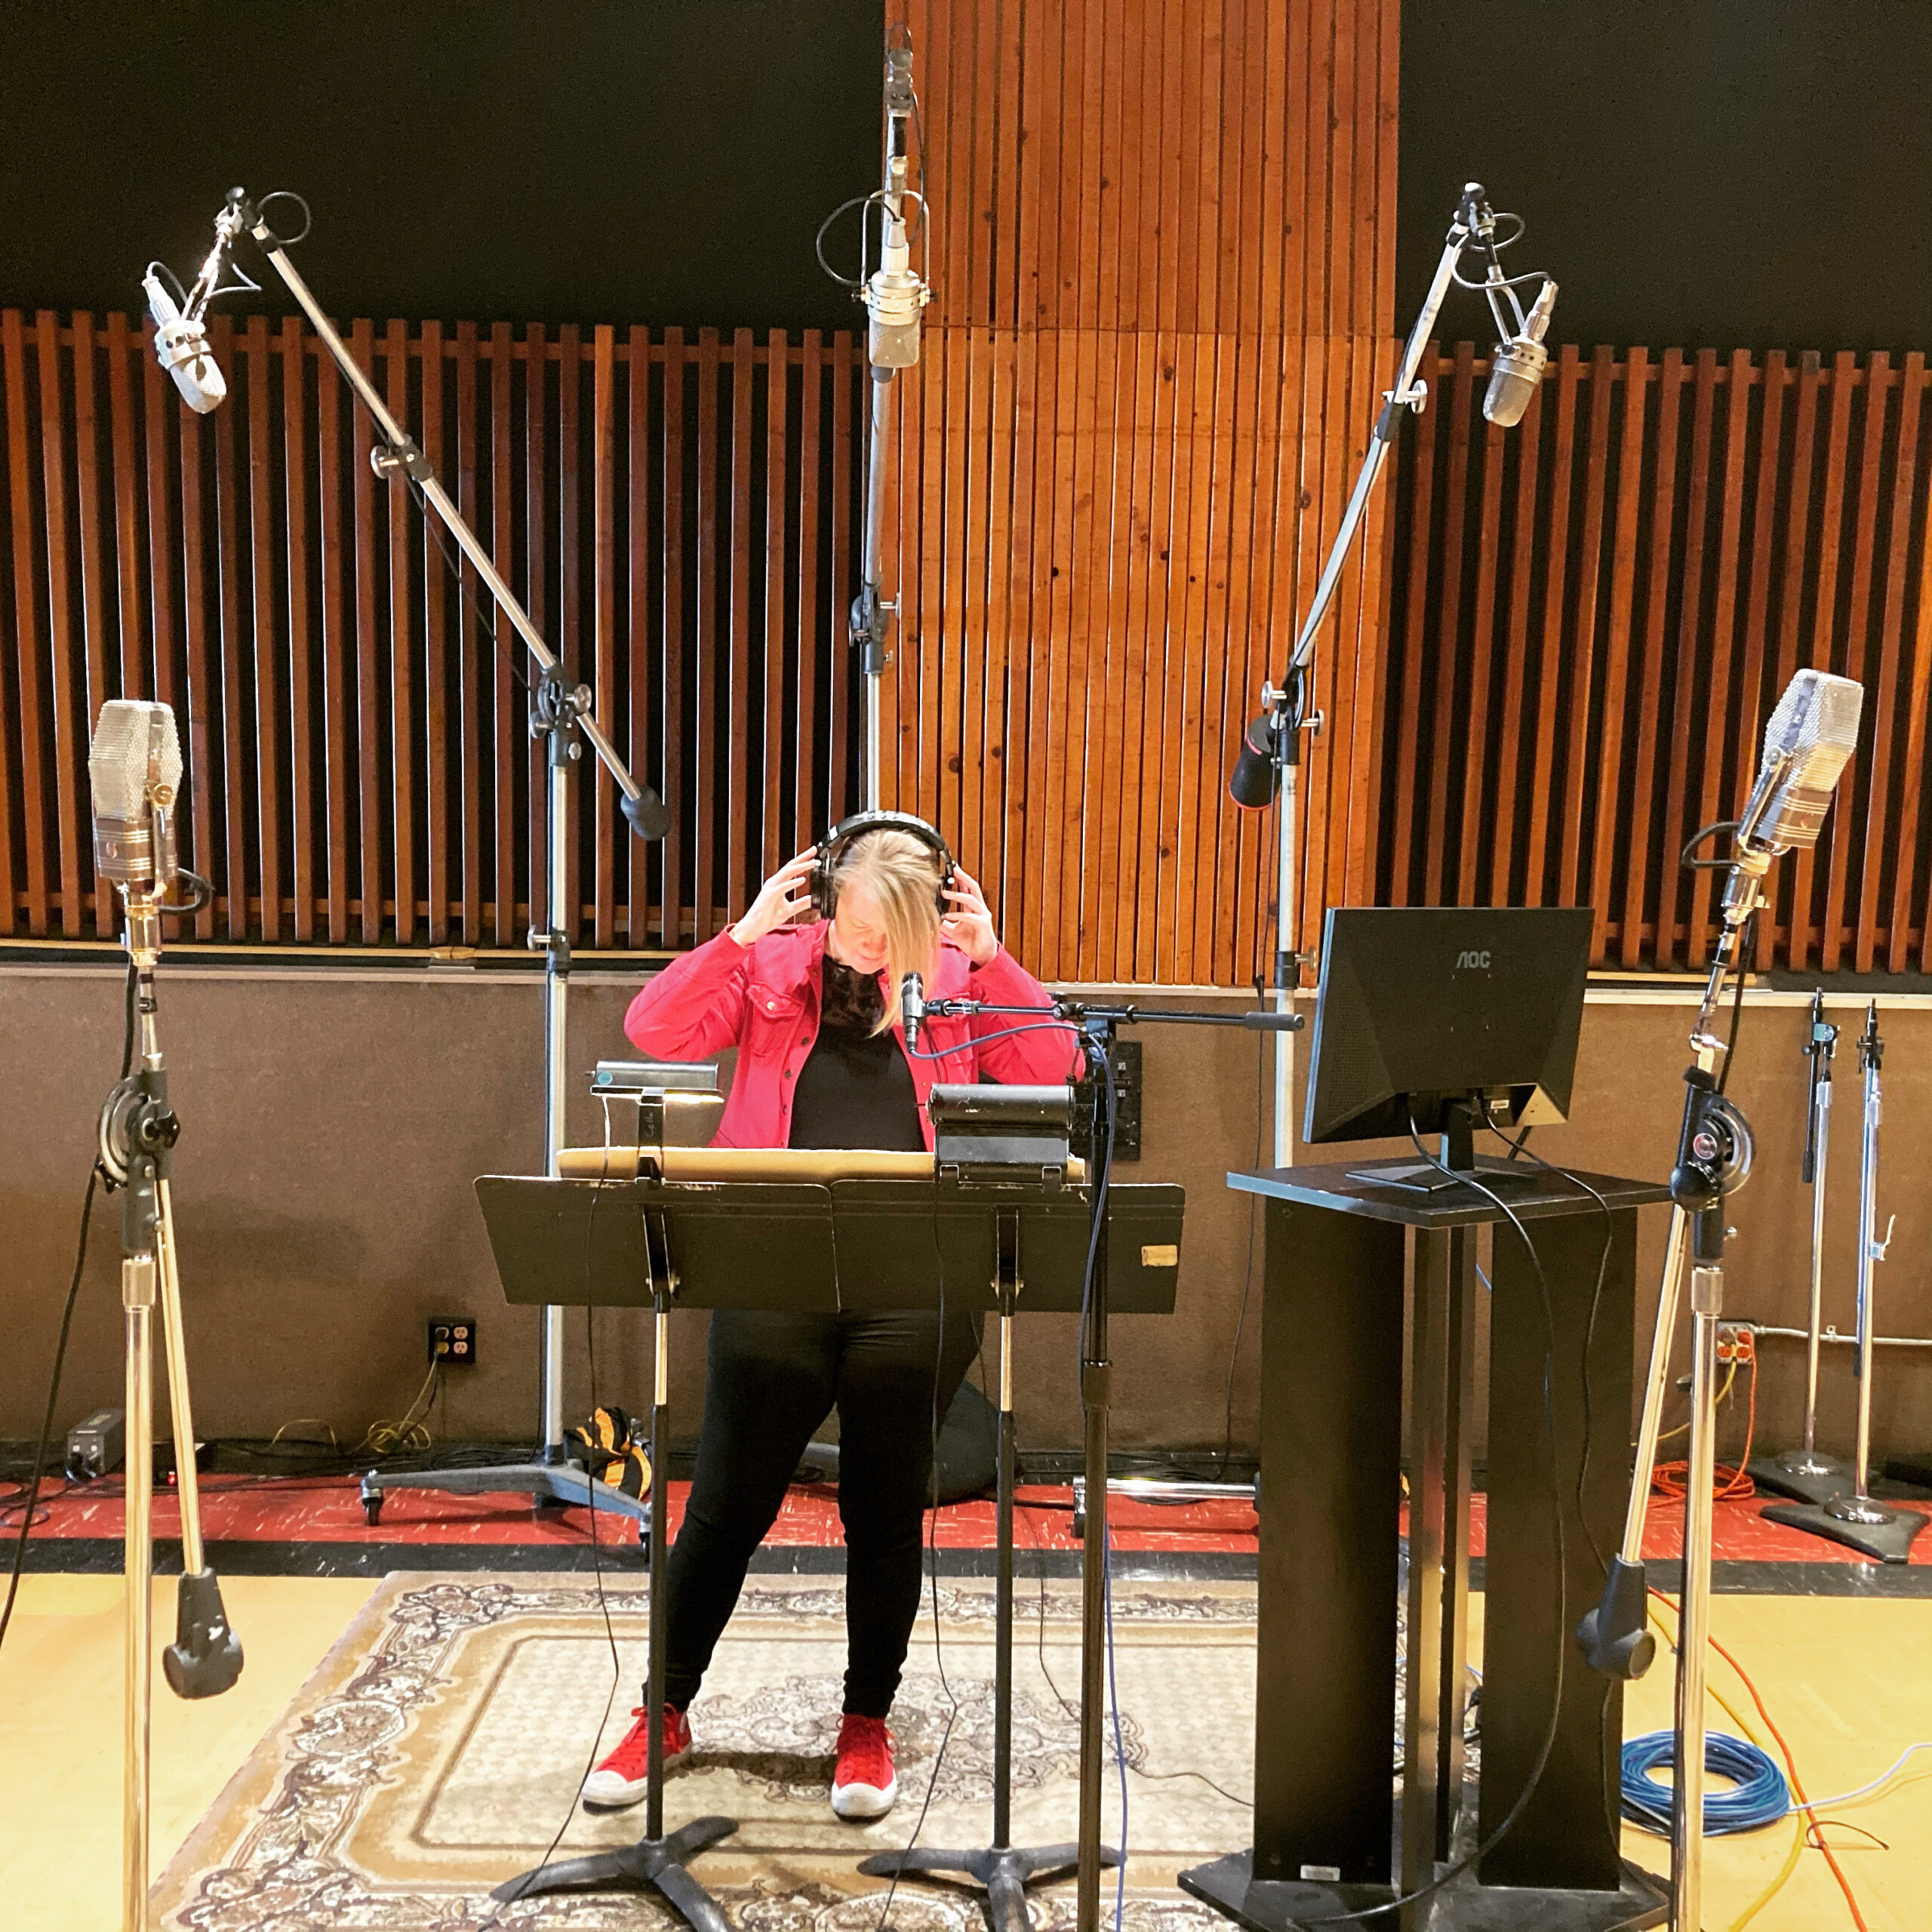 Catherine Joy surrounded by microphones listening to a track on headphones in a recording studio.